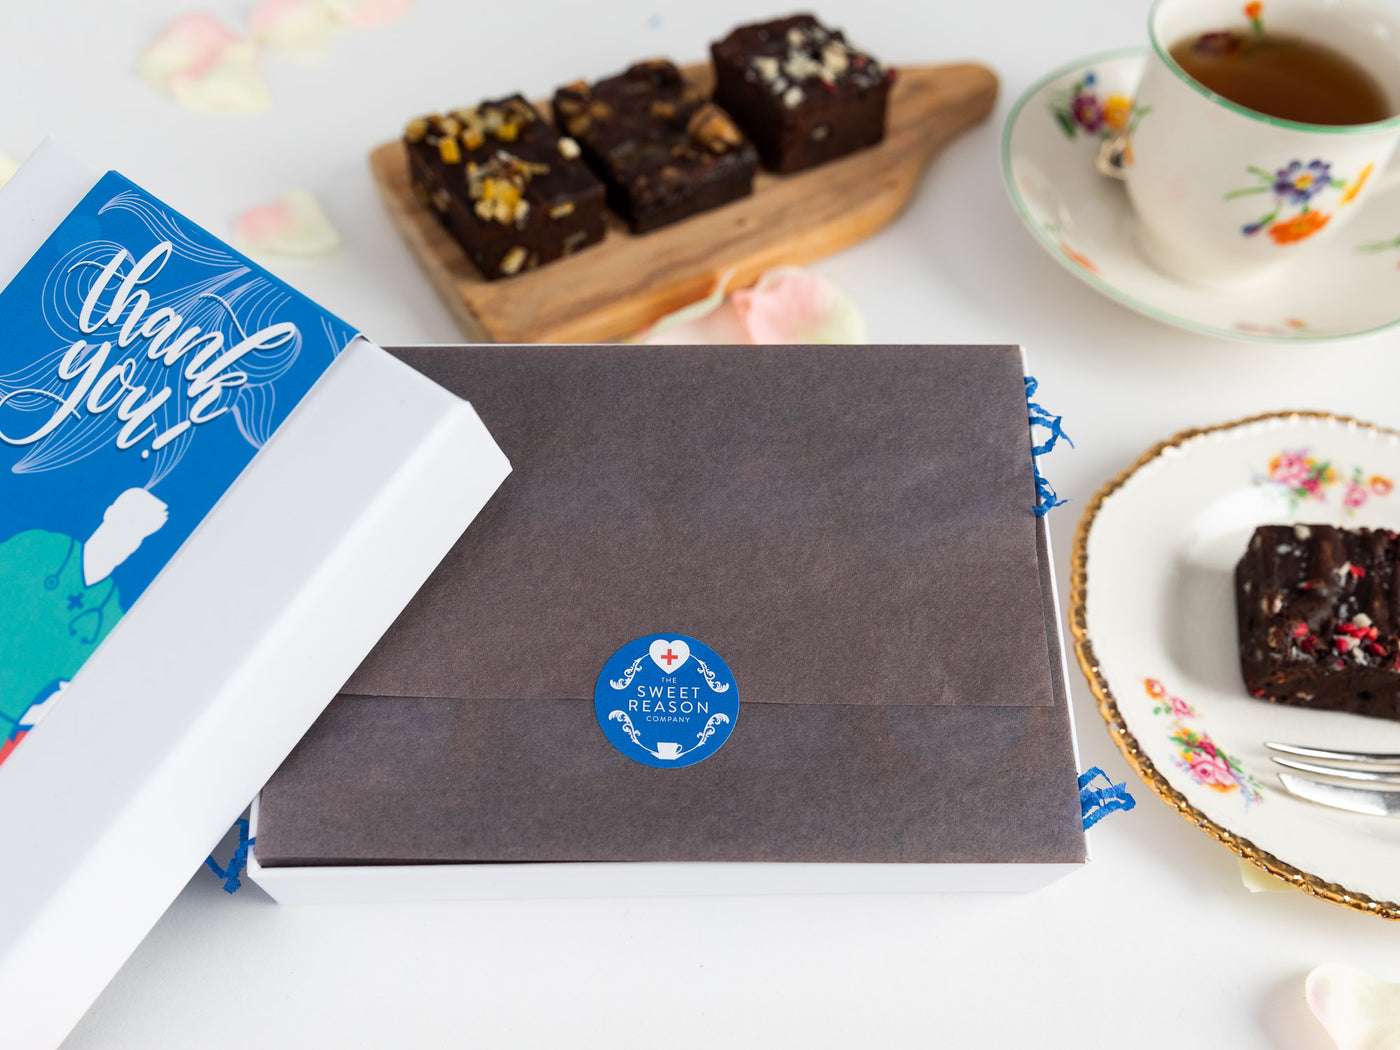 Thank You - Gluten Free Hero Afternoon Tea for Four Gift Box